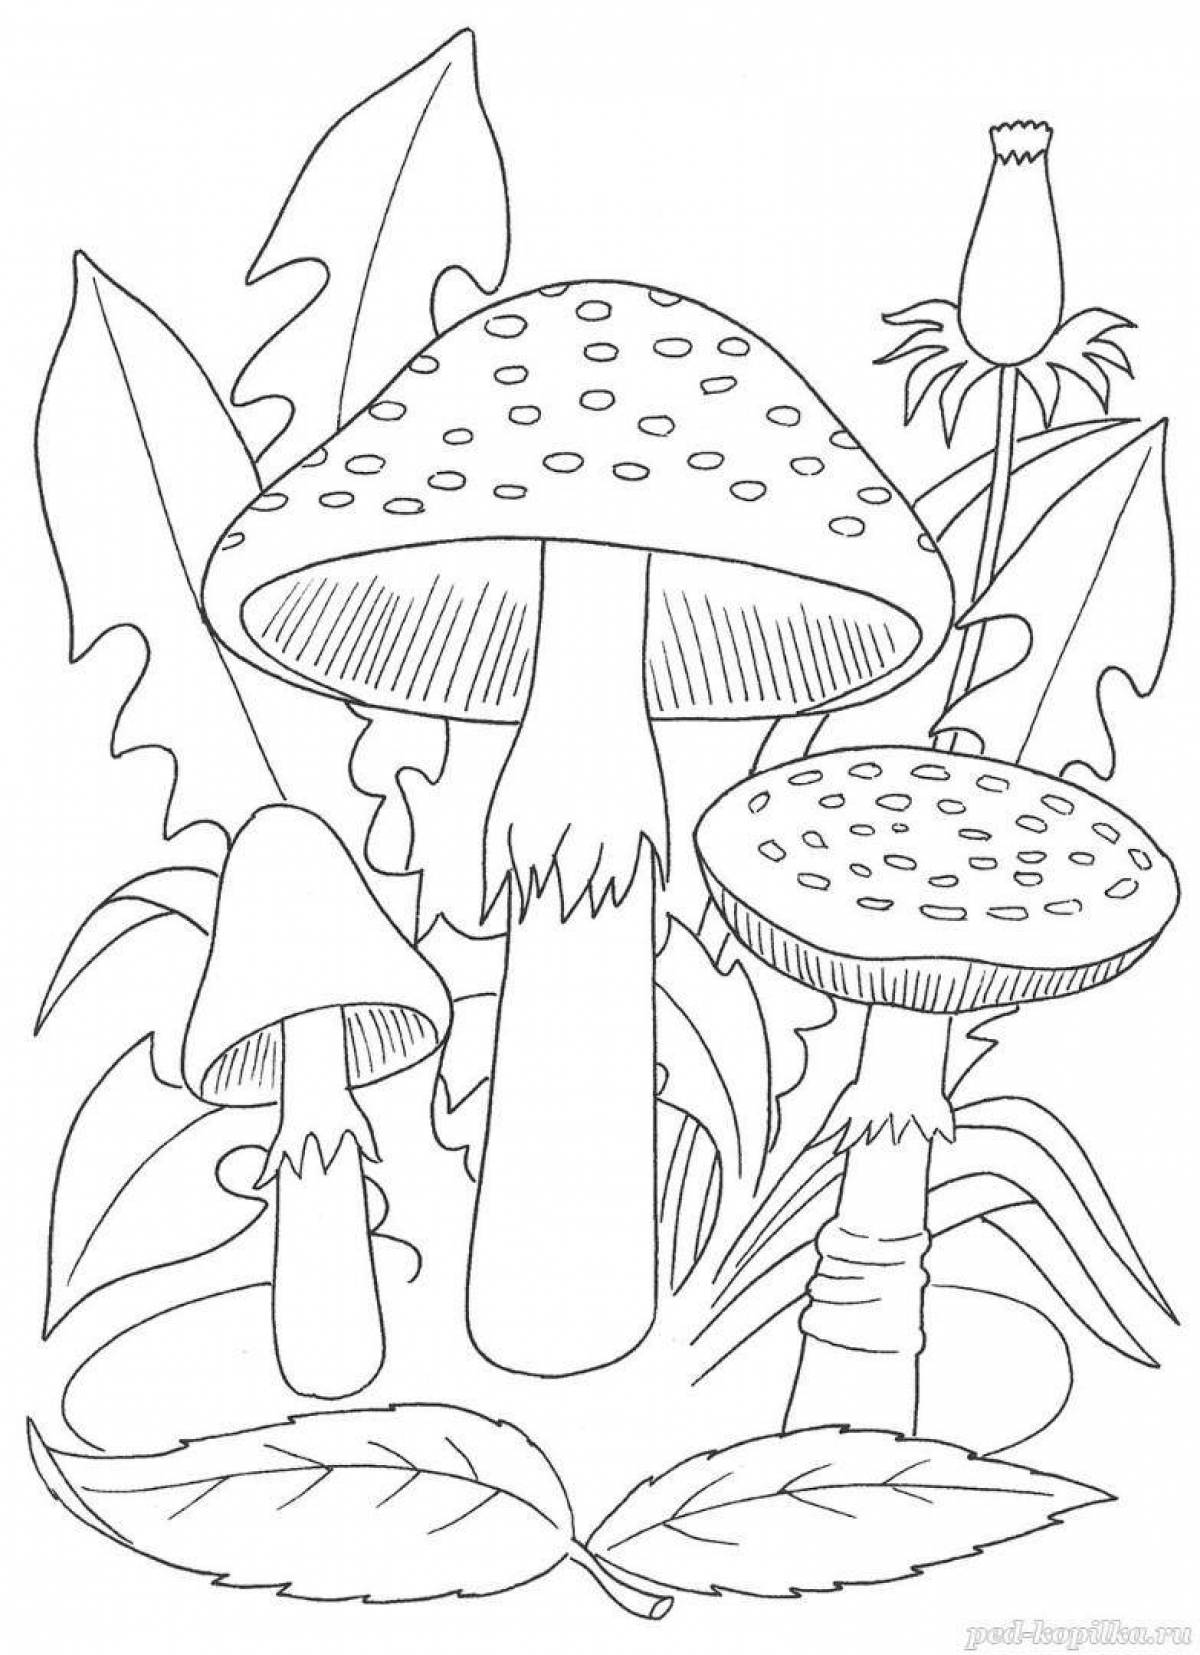 Coloring book dazzling mushrooms for children 6-7 years old